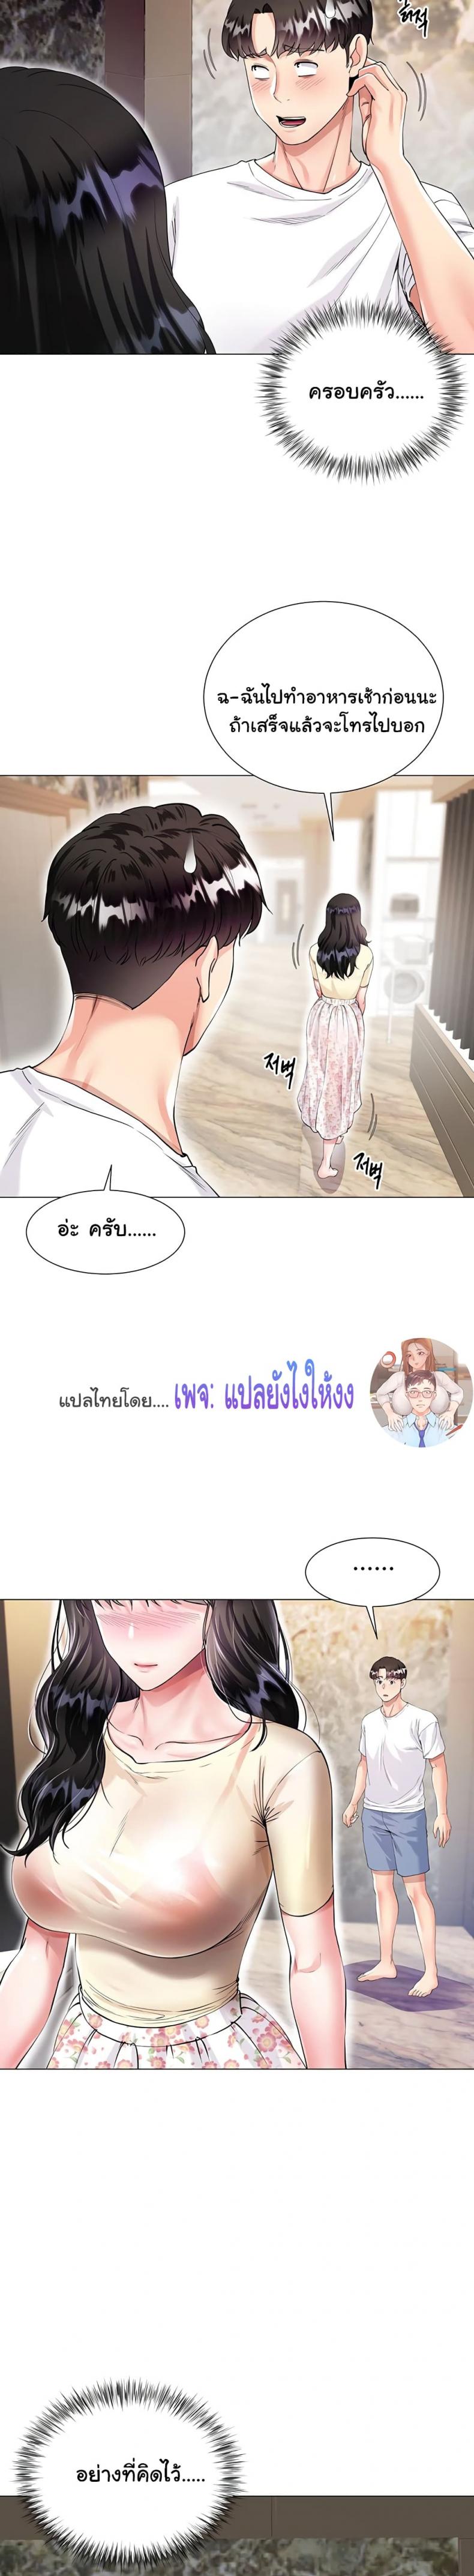 My Sister-in-law’s Skirt 1 ภาพที่ 18